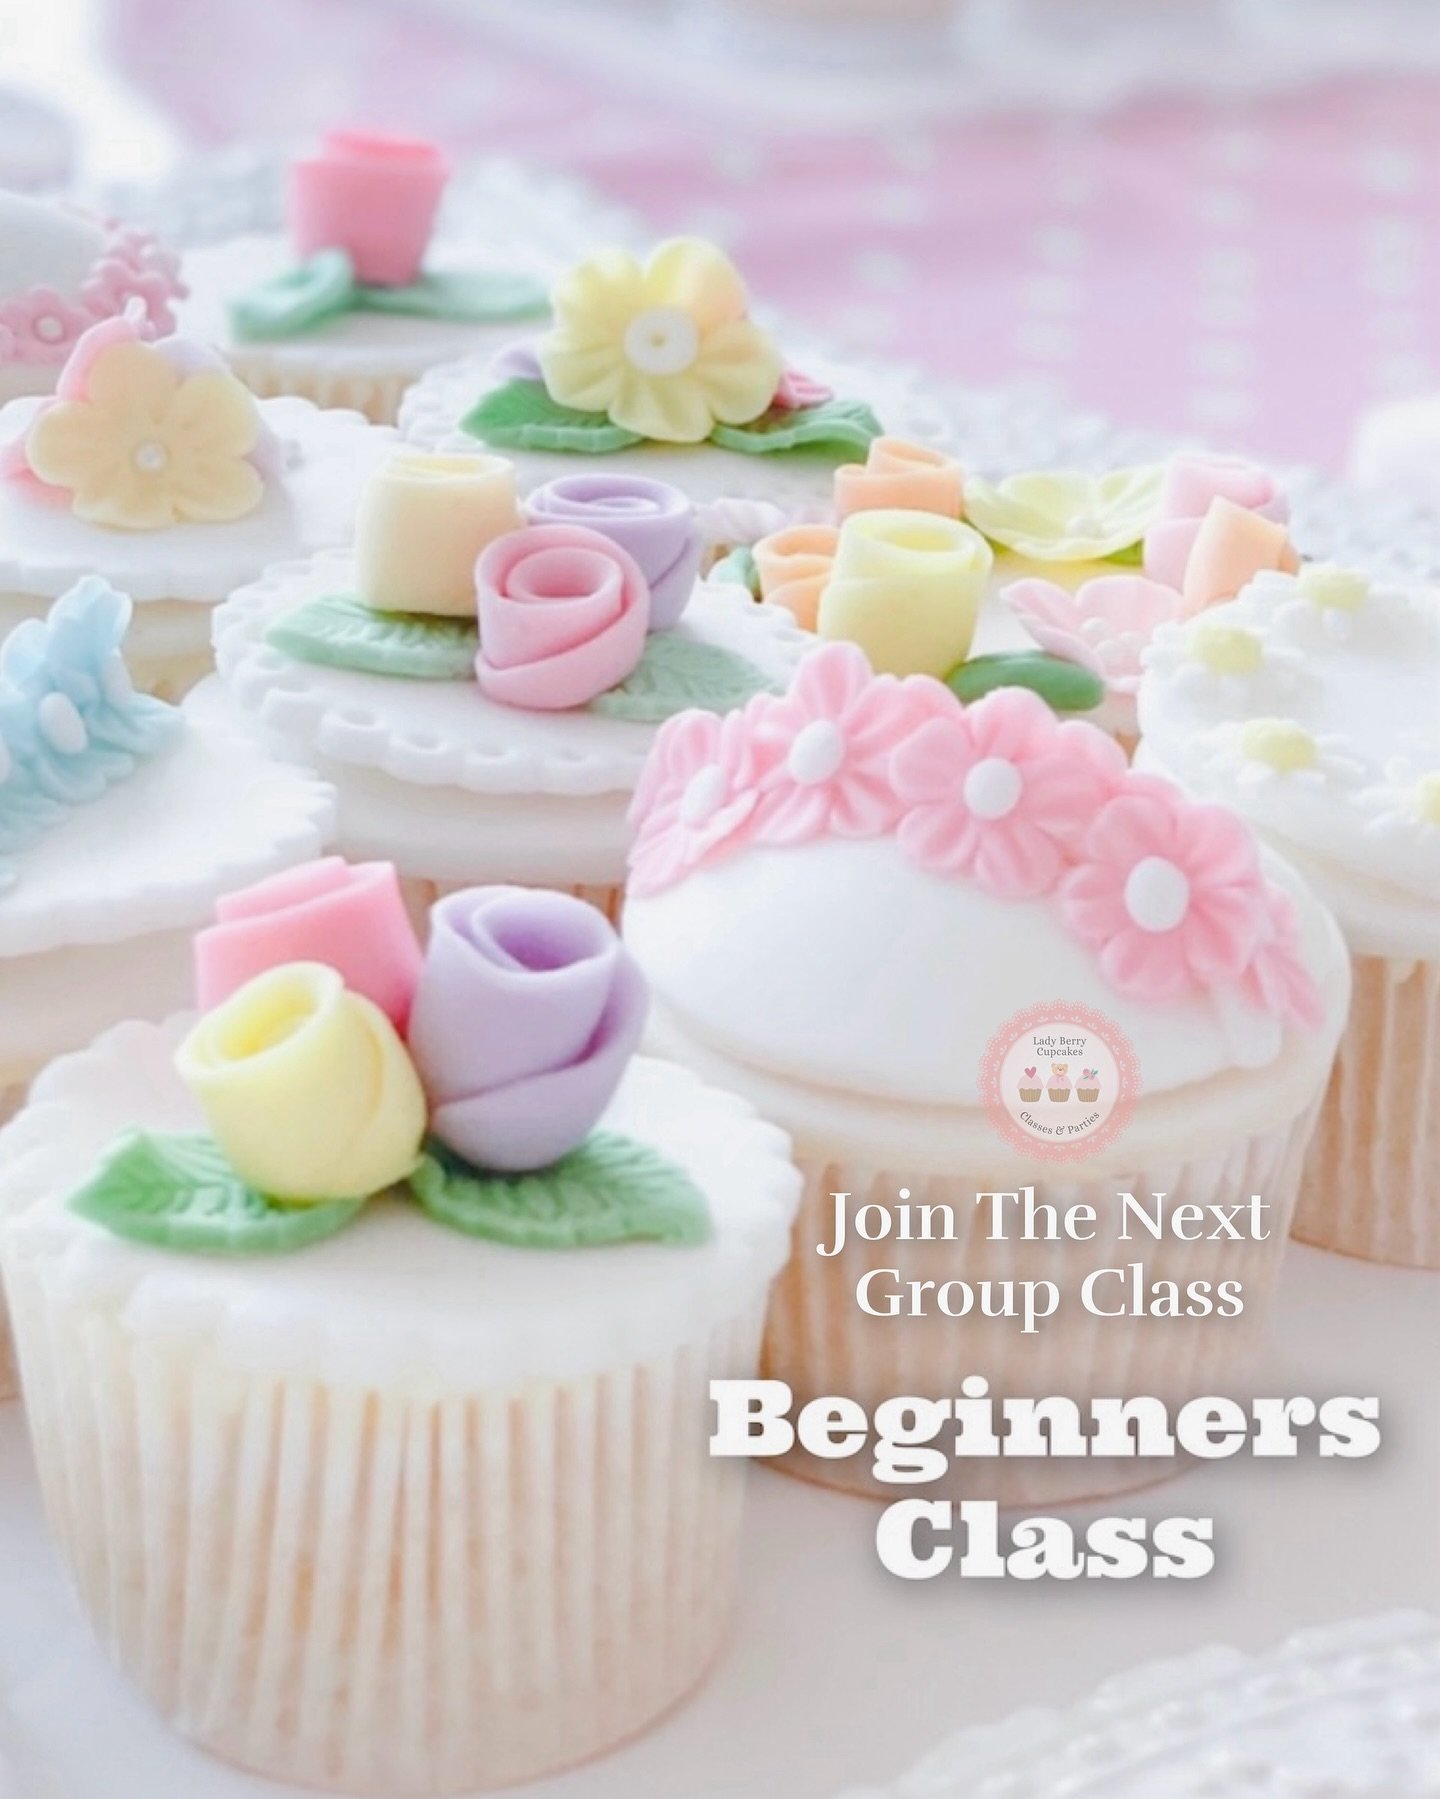 🌸 Would you like to learn how to make professional beautiful Sugar flowered Cupcakes and mastering the art of using fondant? 

🩷 Join the Next group Beginners class to learn how to create a box of 12 beautiful floral cupcakes. Invite your friend yo